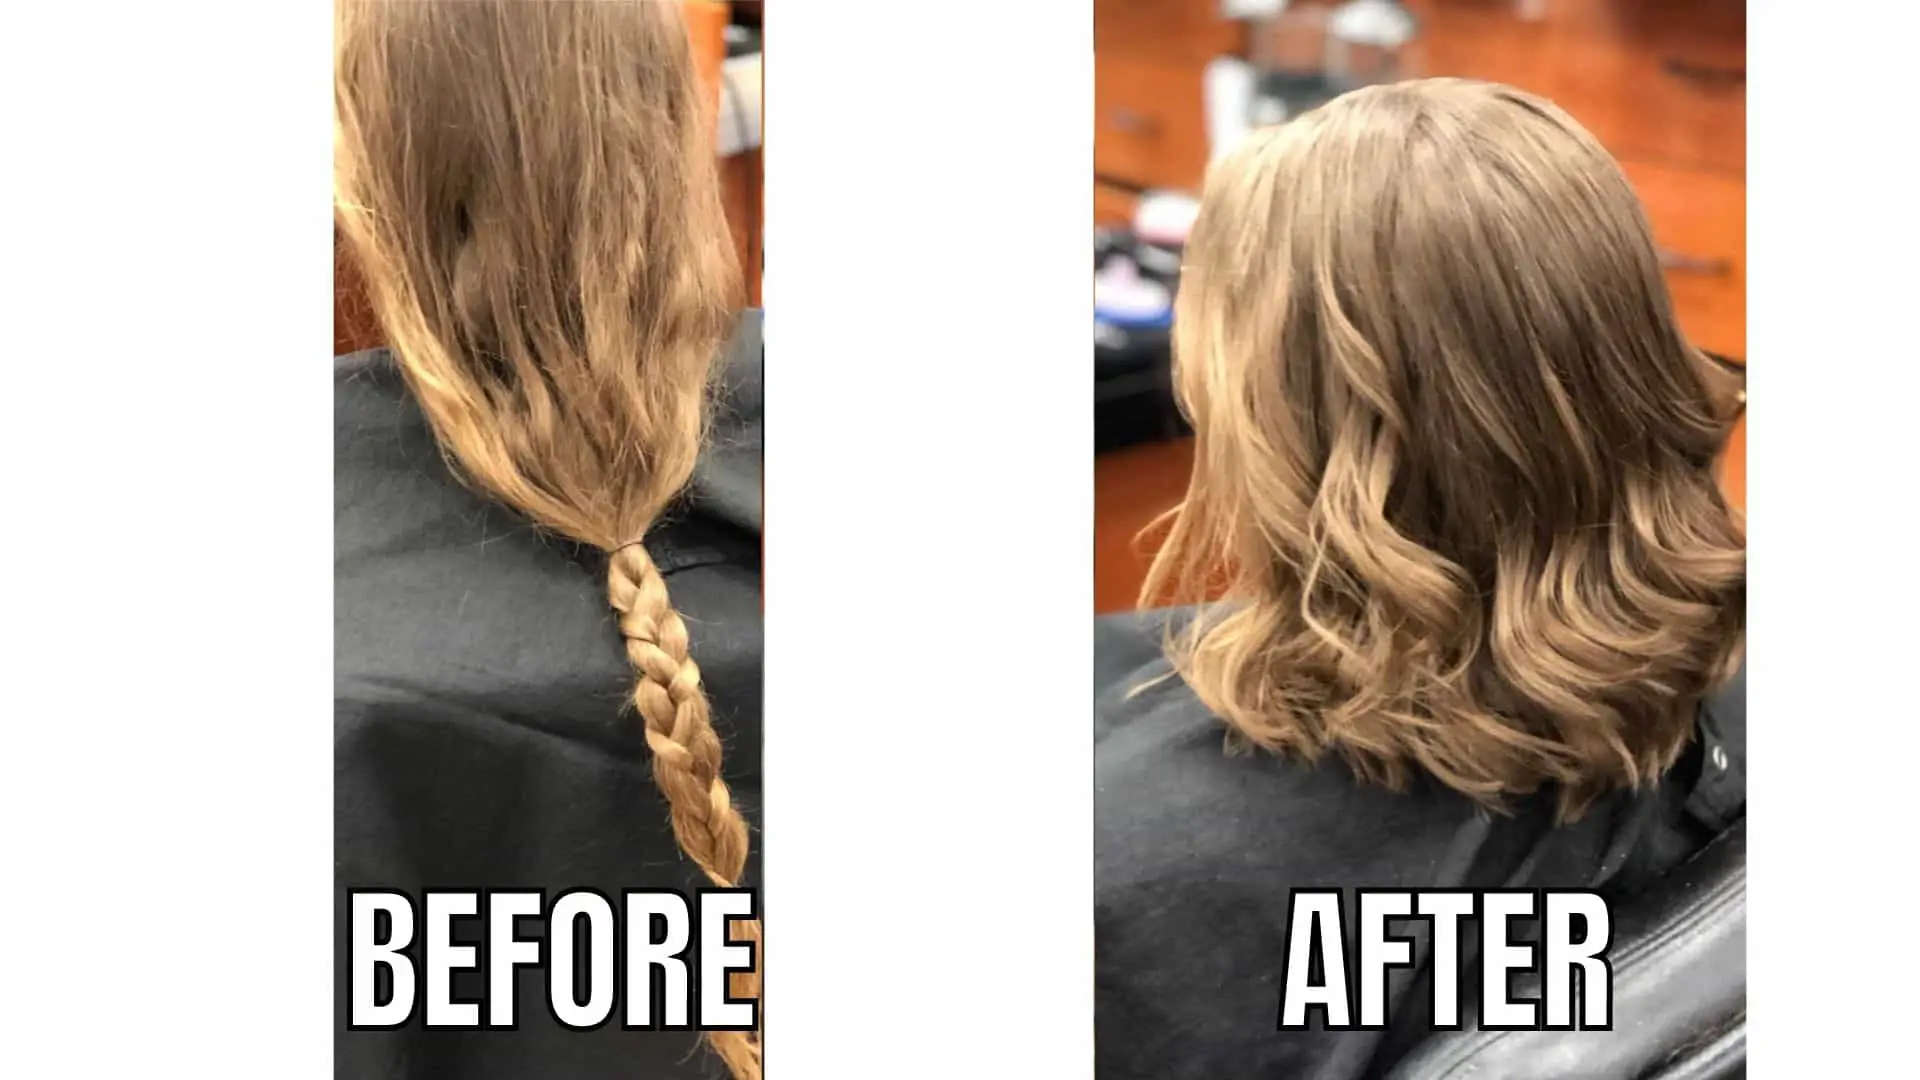 before and after you donate your hair